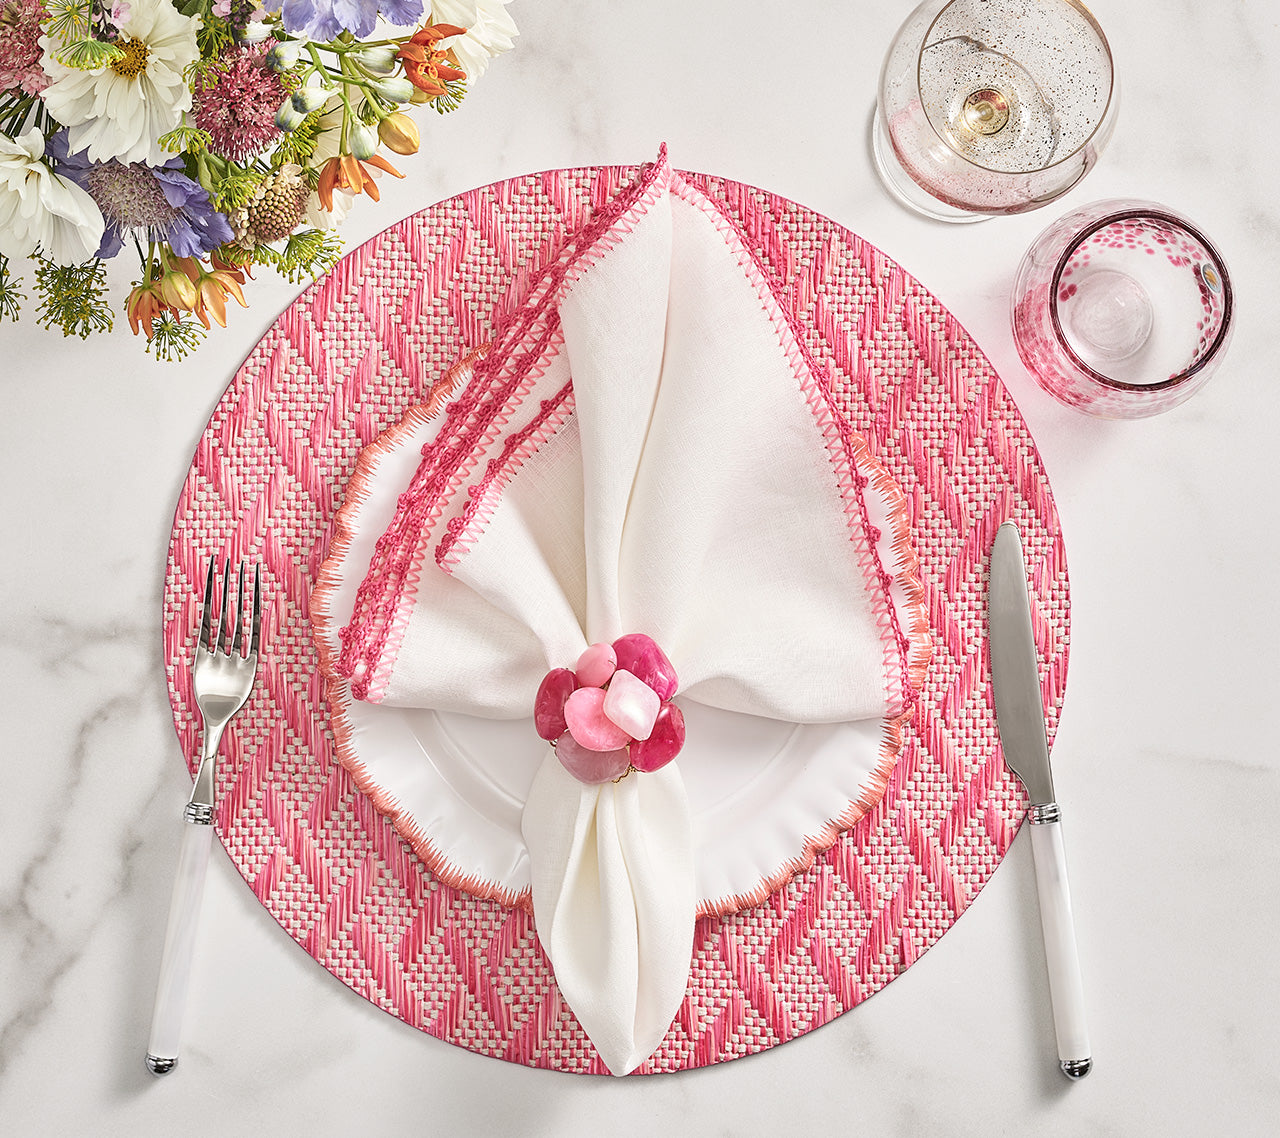 Knotted Edge Napkin in White, Pink & Blush, Set of 4